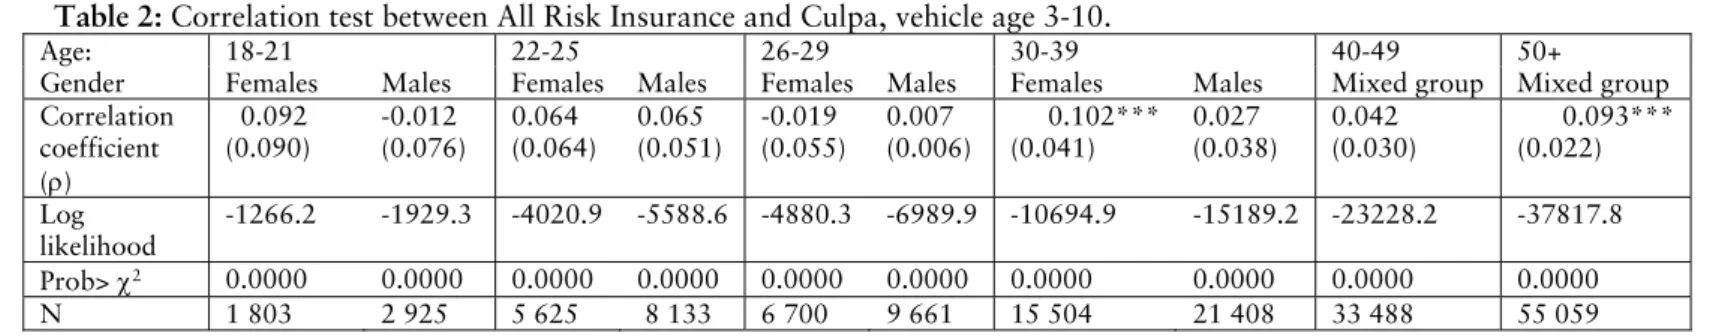 Table 2: Correlation test between All Risk Insurance and Culpa, vehicle age 3-10. 